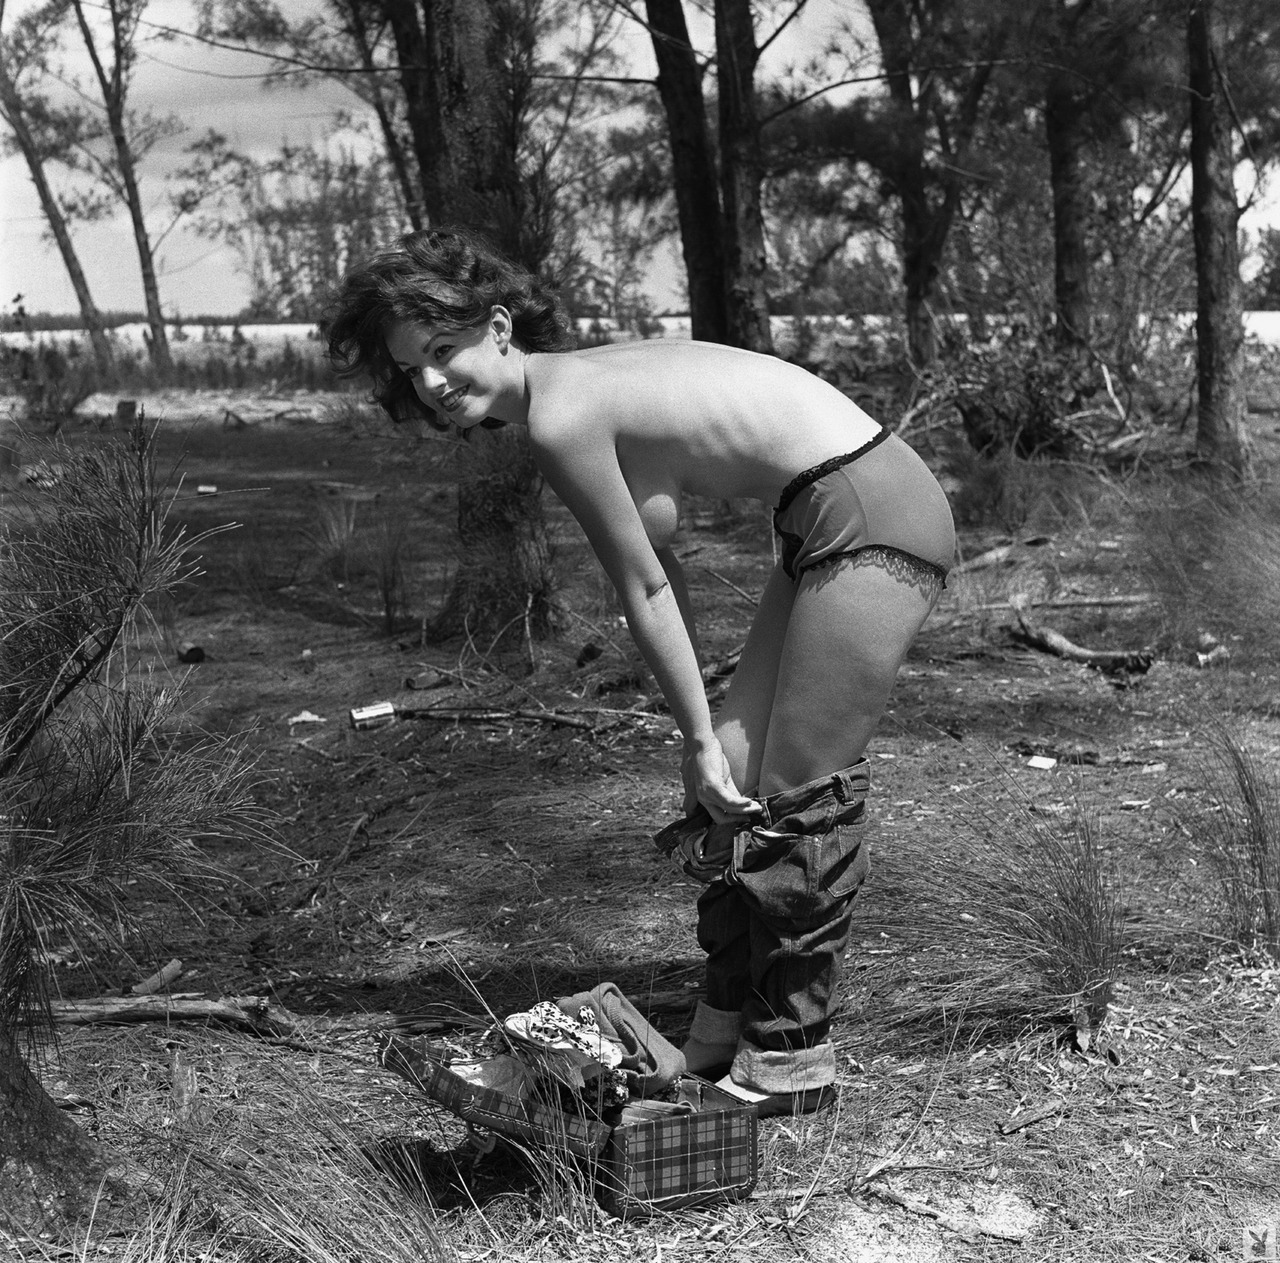 B&W  Photo Girl Undressing Outdoors 1960's 1940's 50's  Pinup Centerfold  / 8181